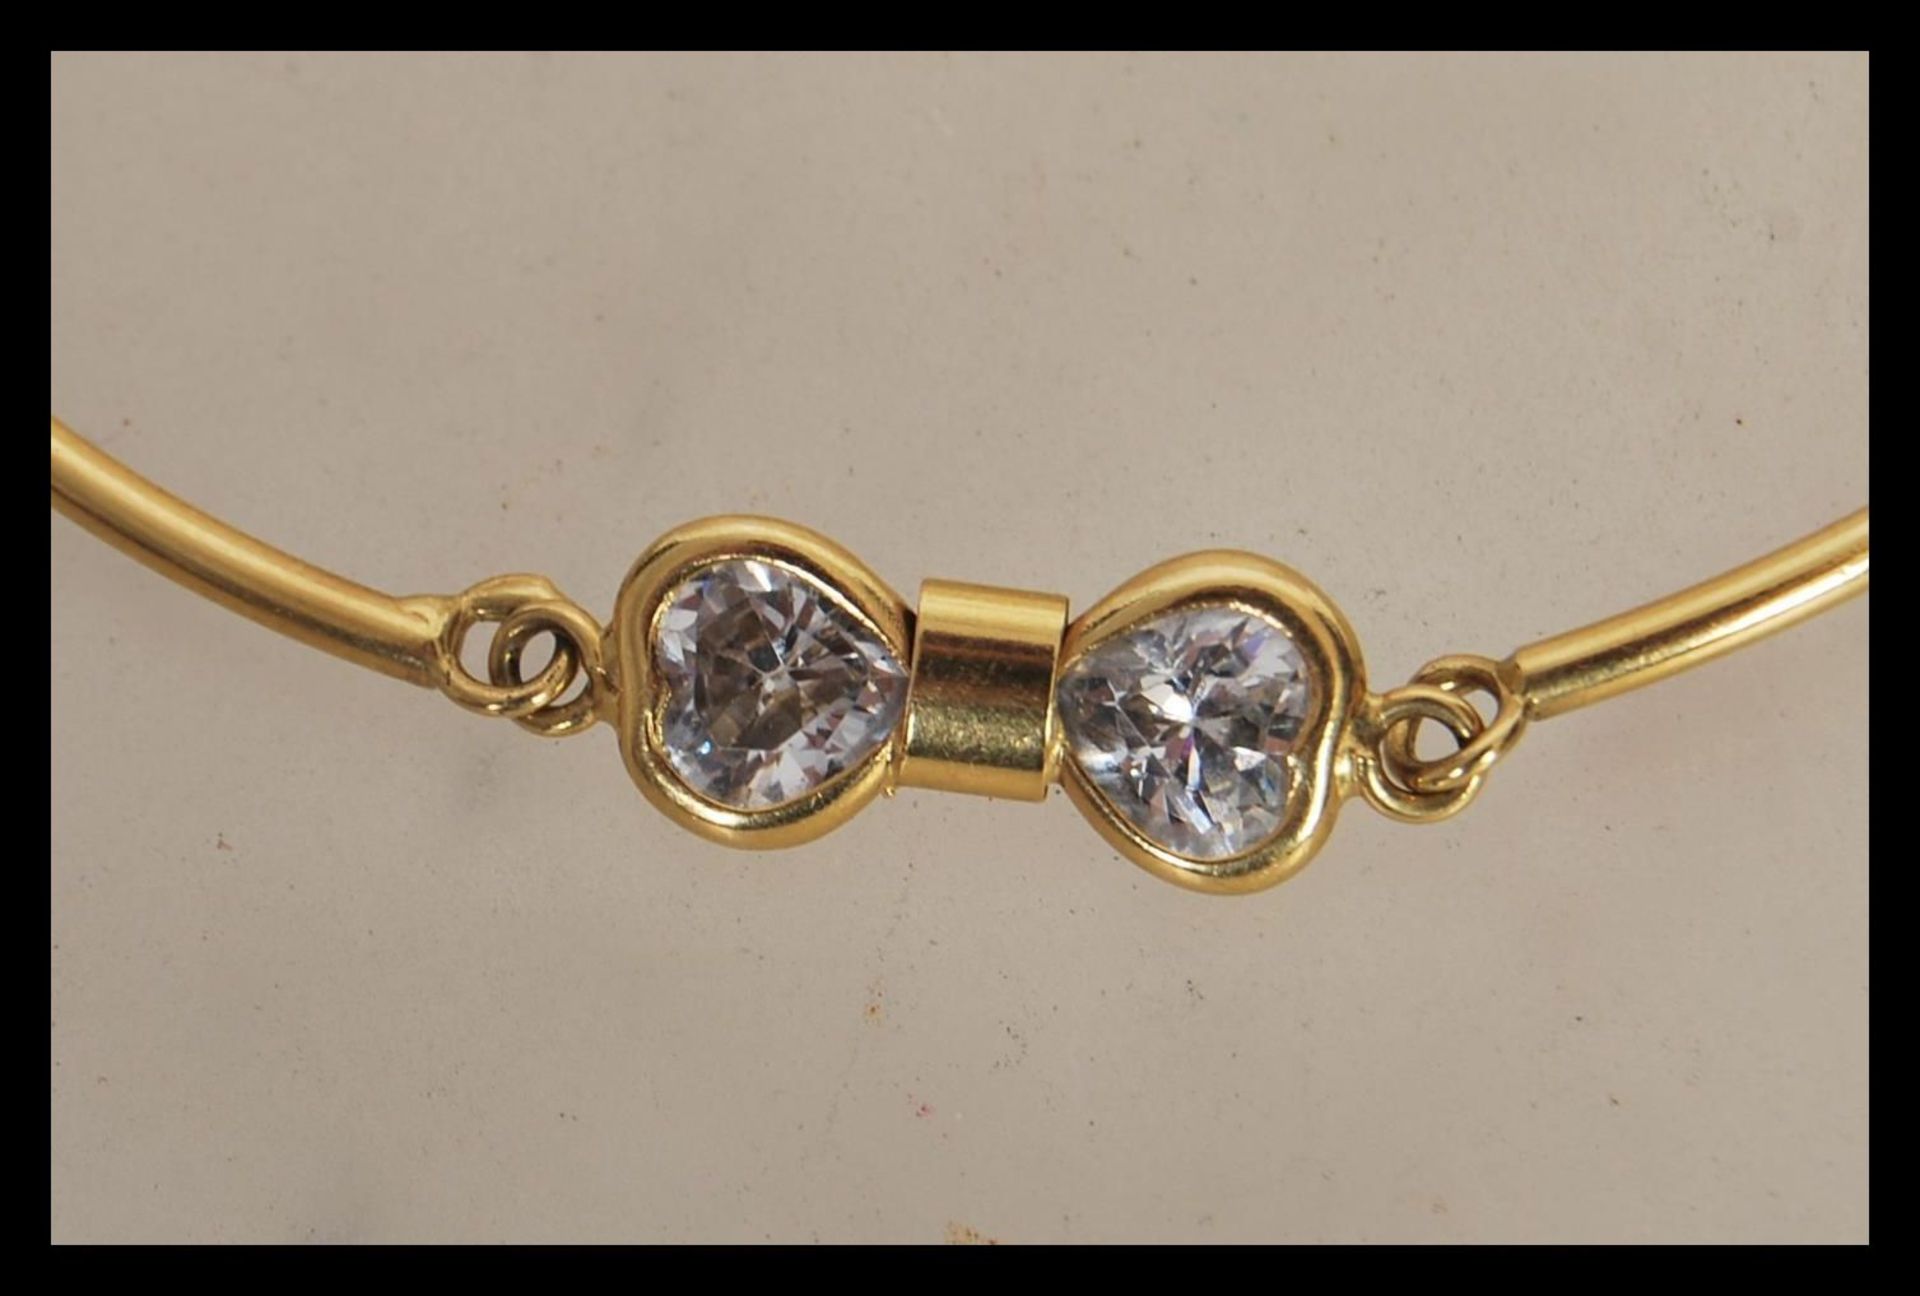 A stamped 750 18ct gold spacer bracelet set with six white stones, having a lobster clasp. Weight - Image 2 of 3